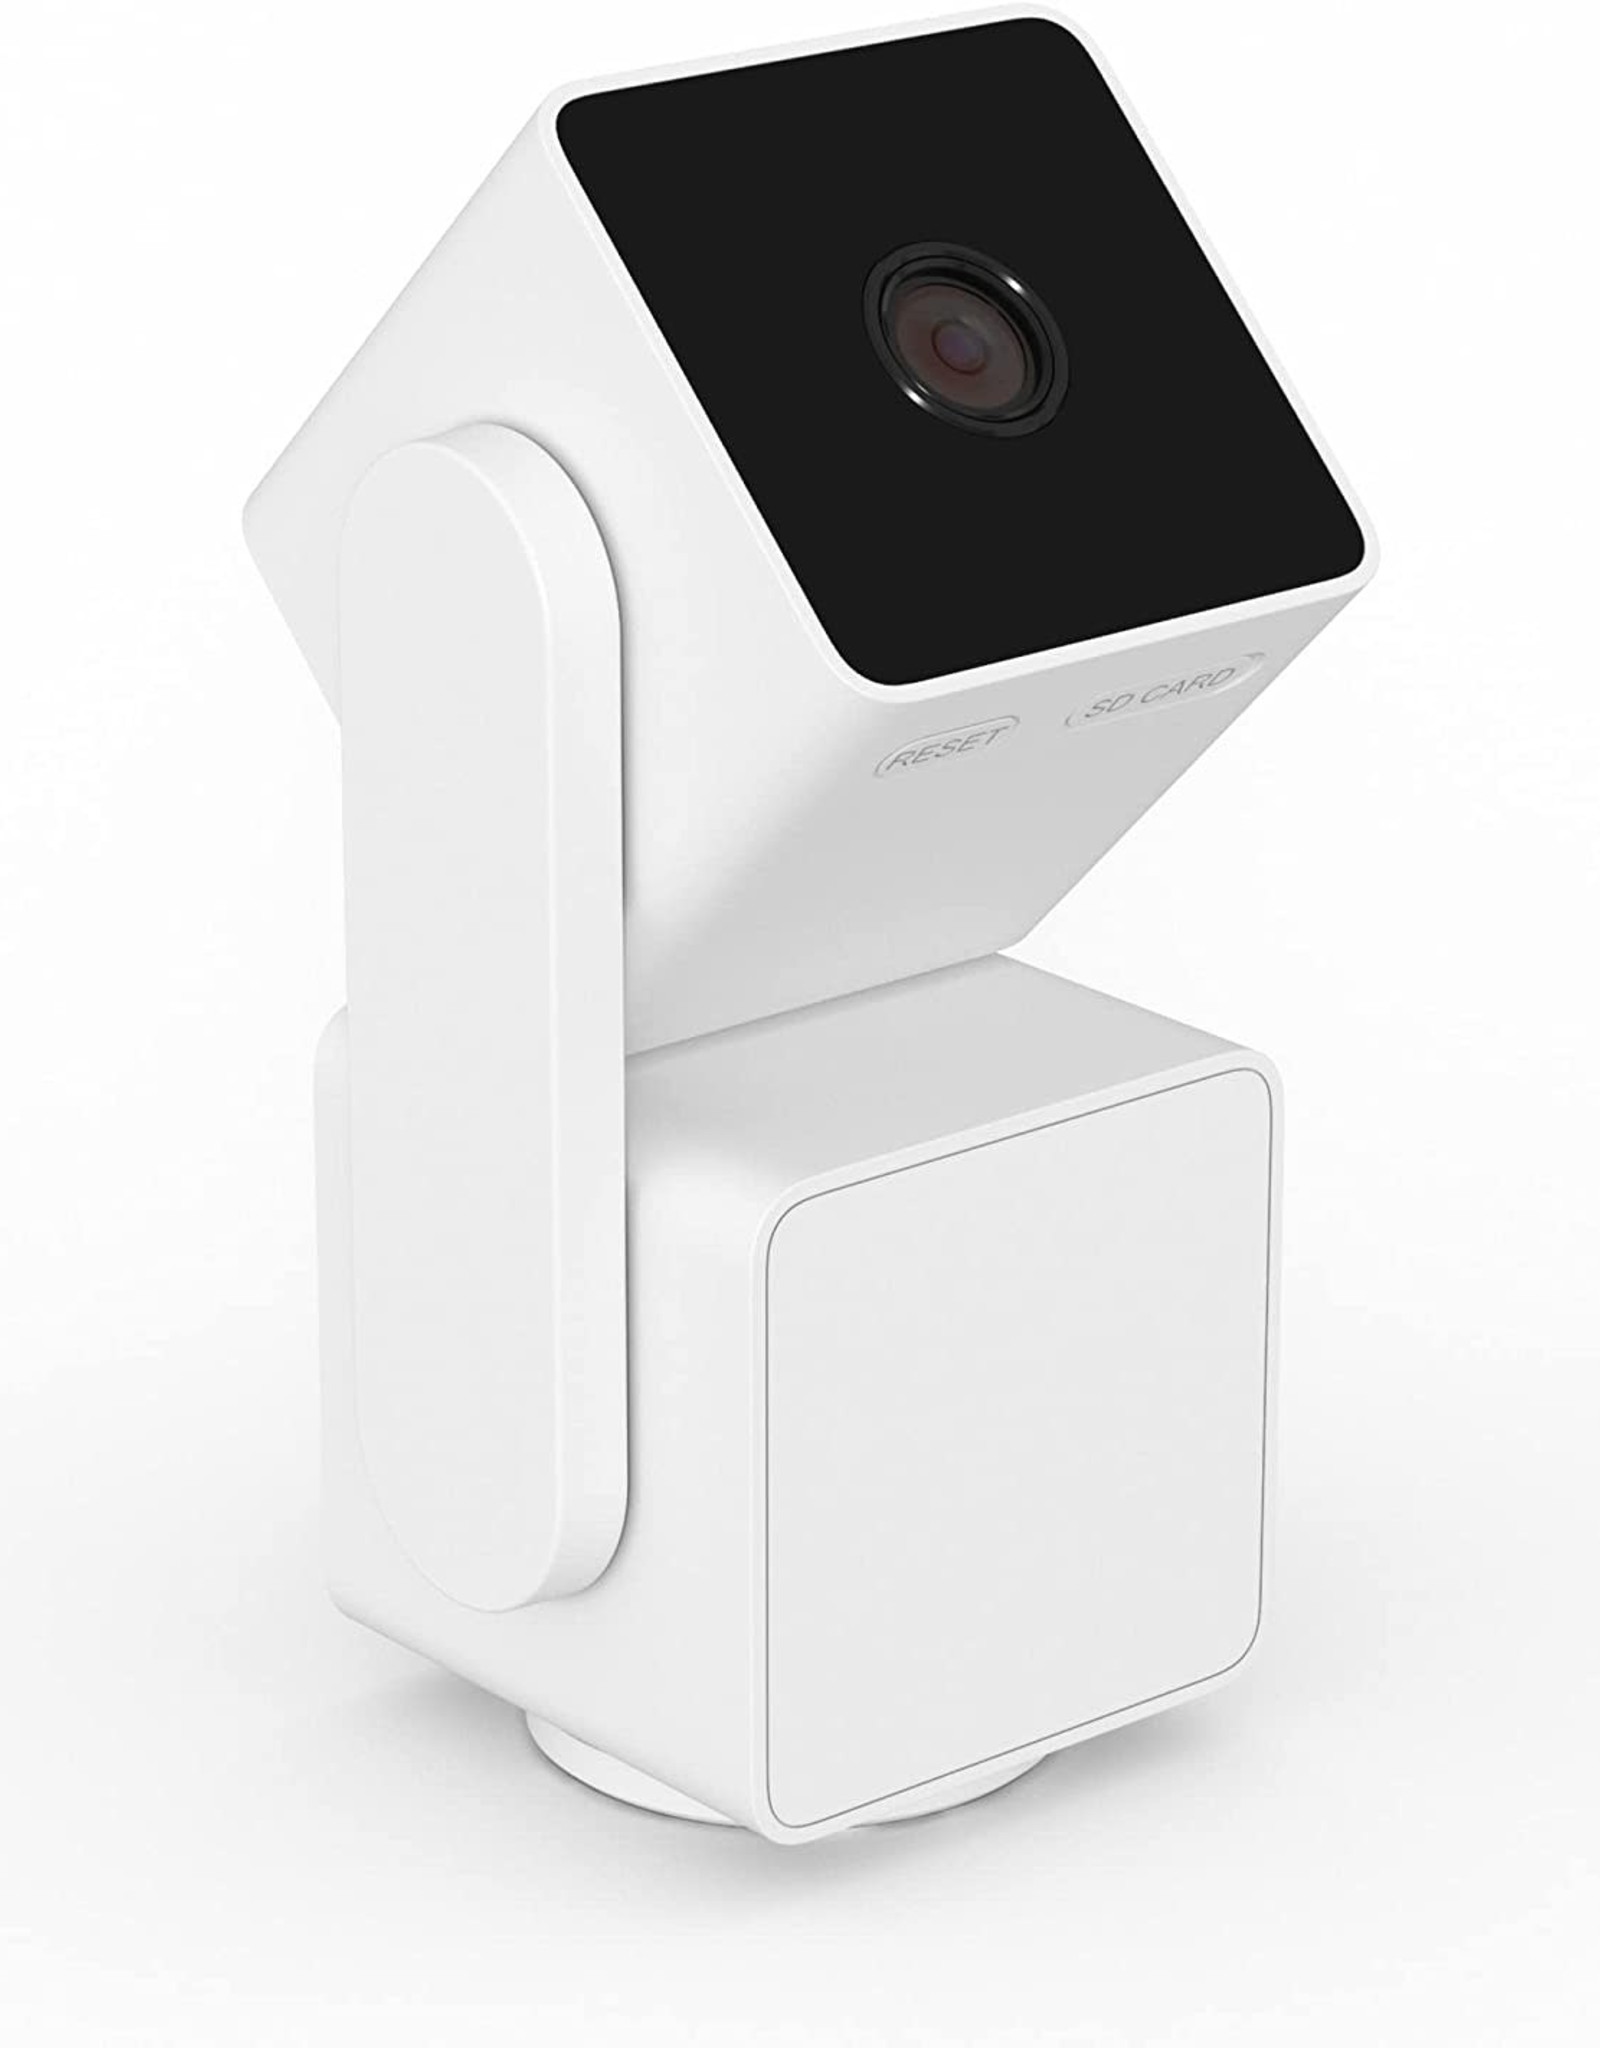 WYZE Cam Pan v3 Indoor/Outdoor IP65-Rated 1080p Pan/Tilt/Zoom Wi-Fi Smart Home Security Camera with Color Night Vision, 2-Way Audio, Compatible with Alexa & Google Assistant, White